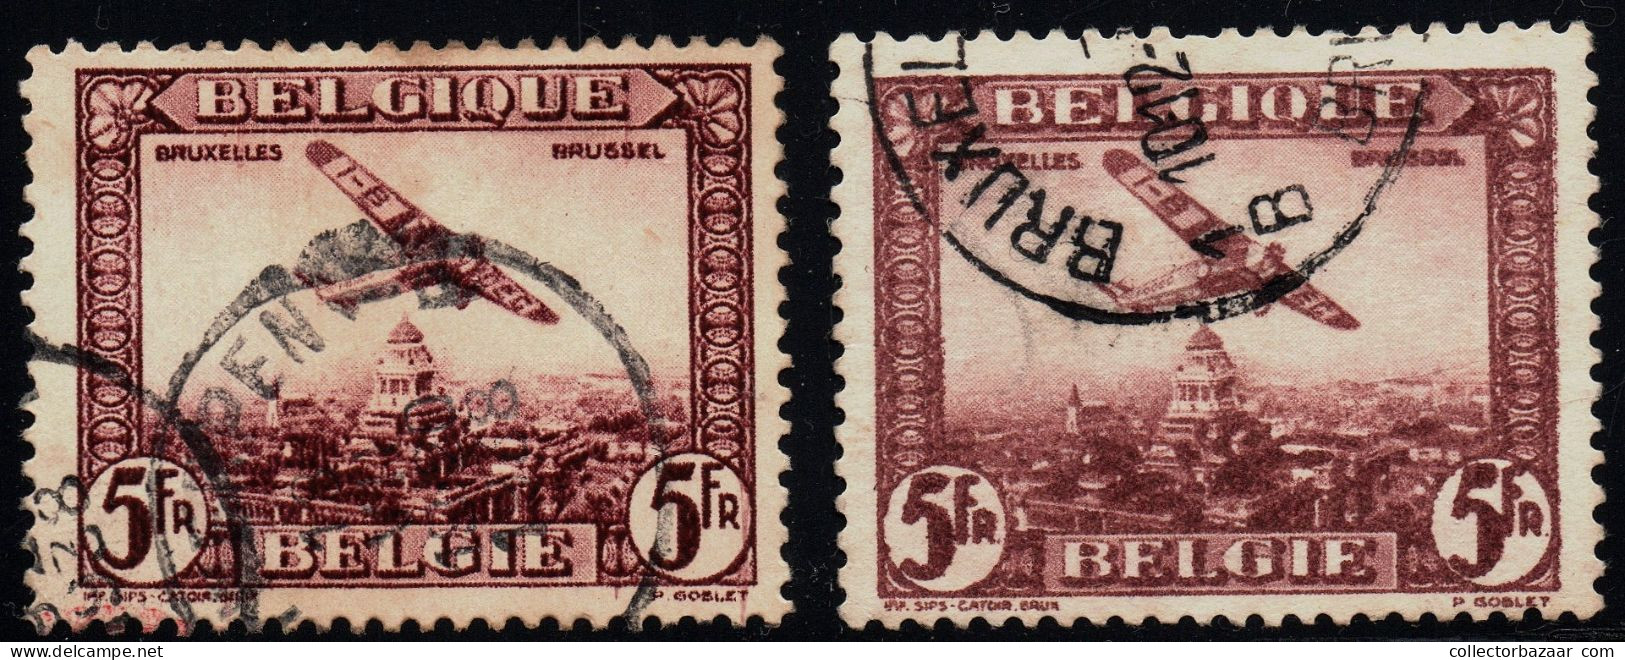 Belgium Airmail Stamp With A Blurred Defective Printing Error Two Stamps One For Comparison - 1901-1930